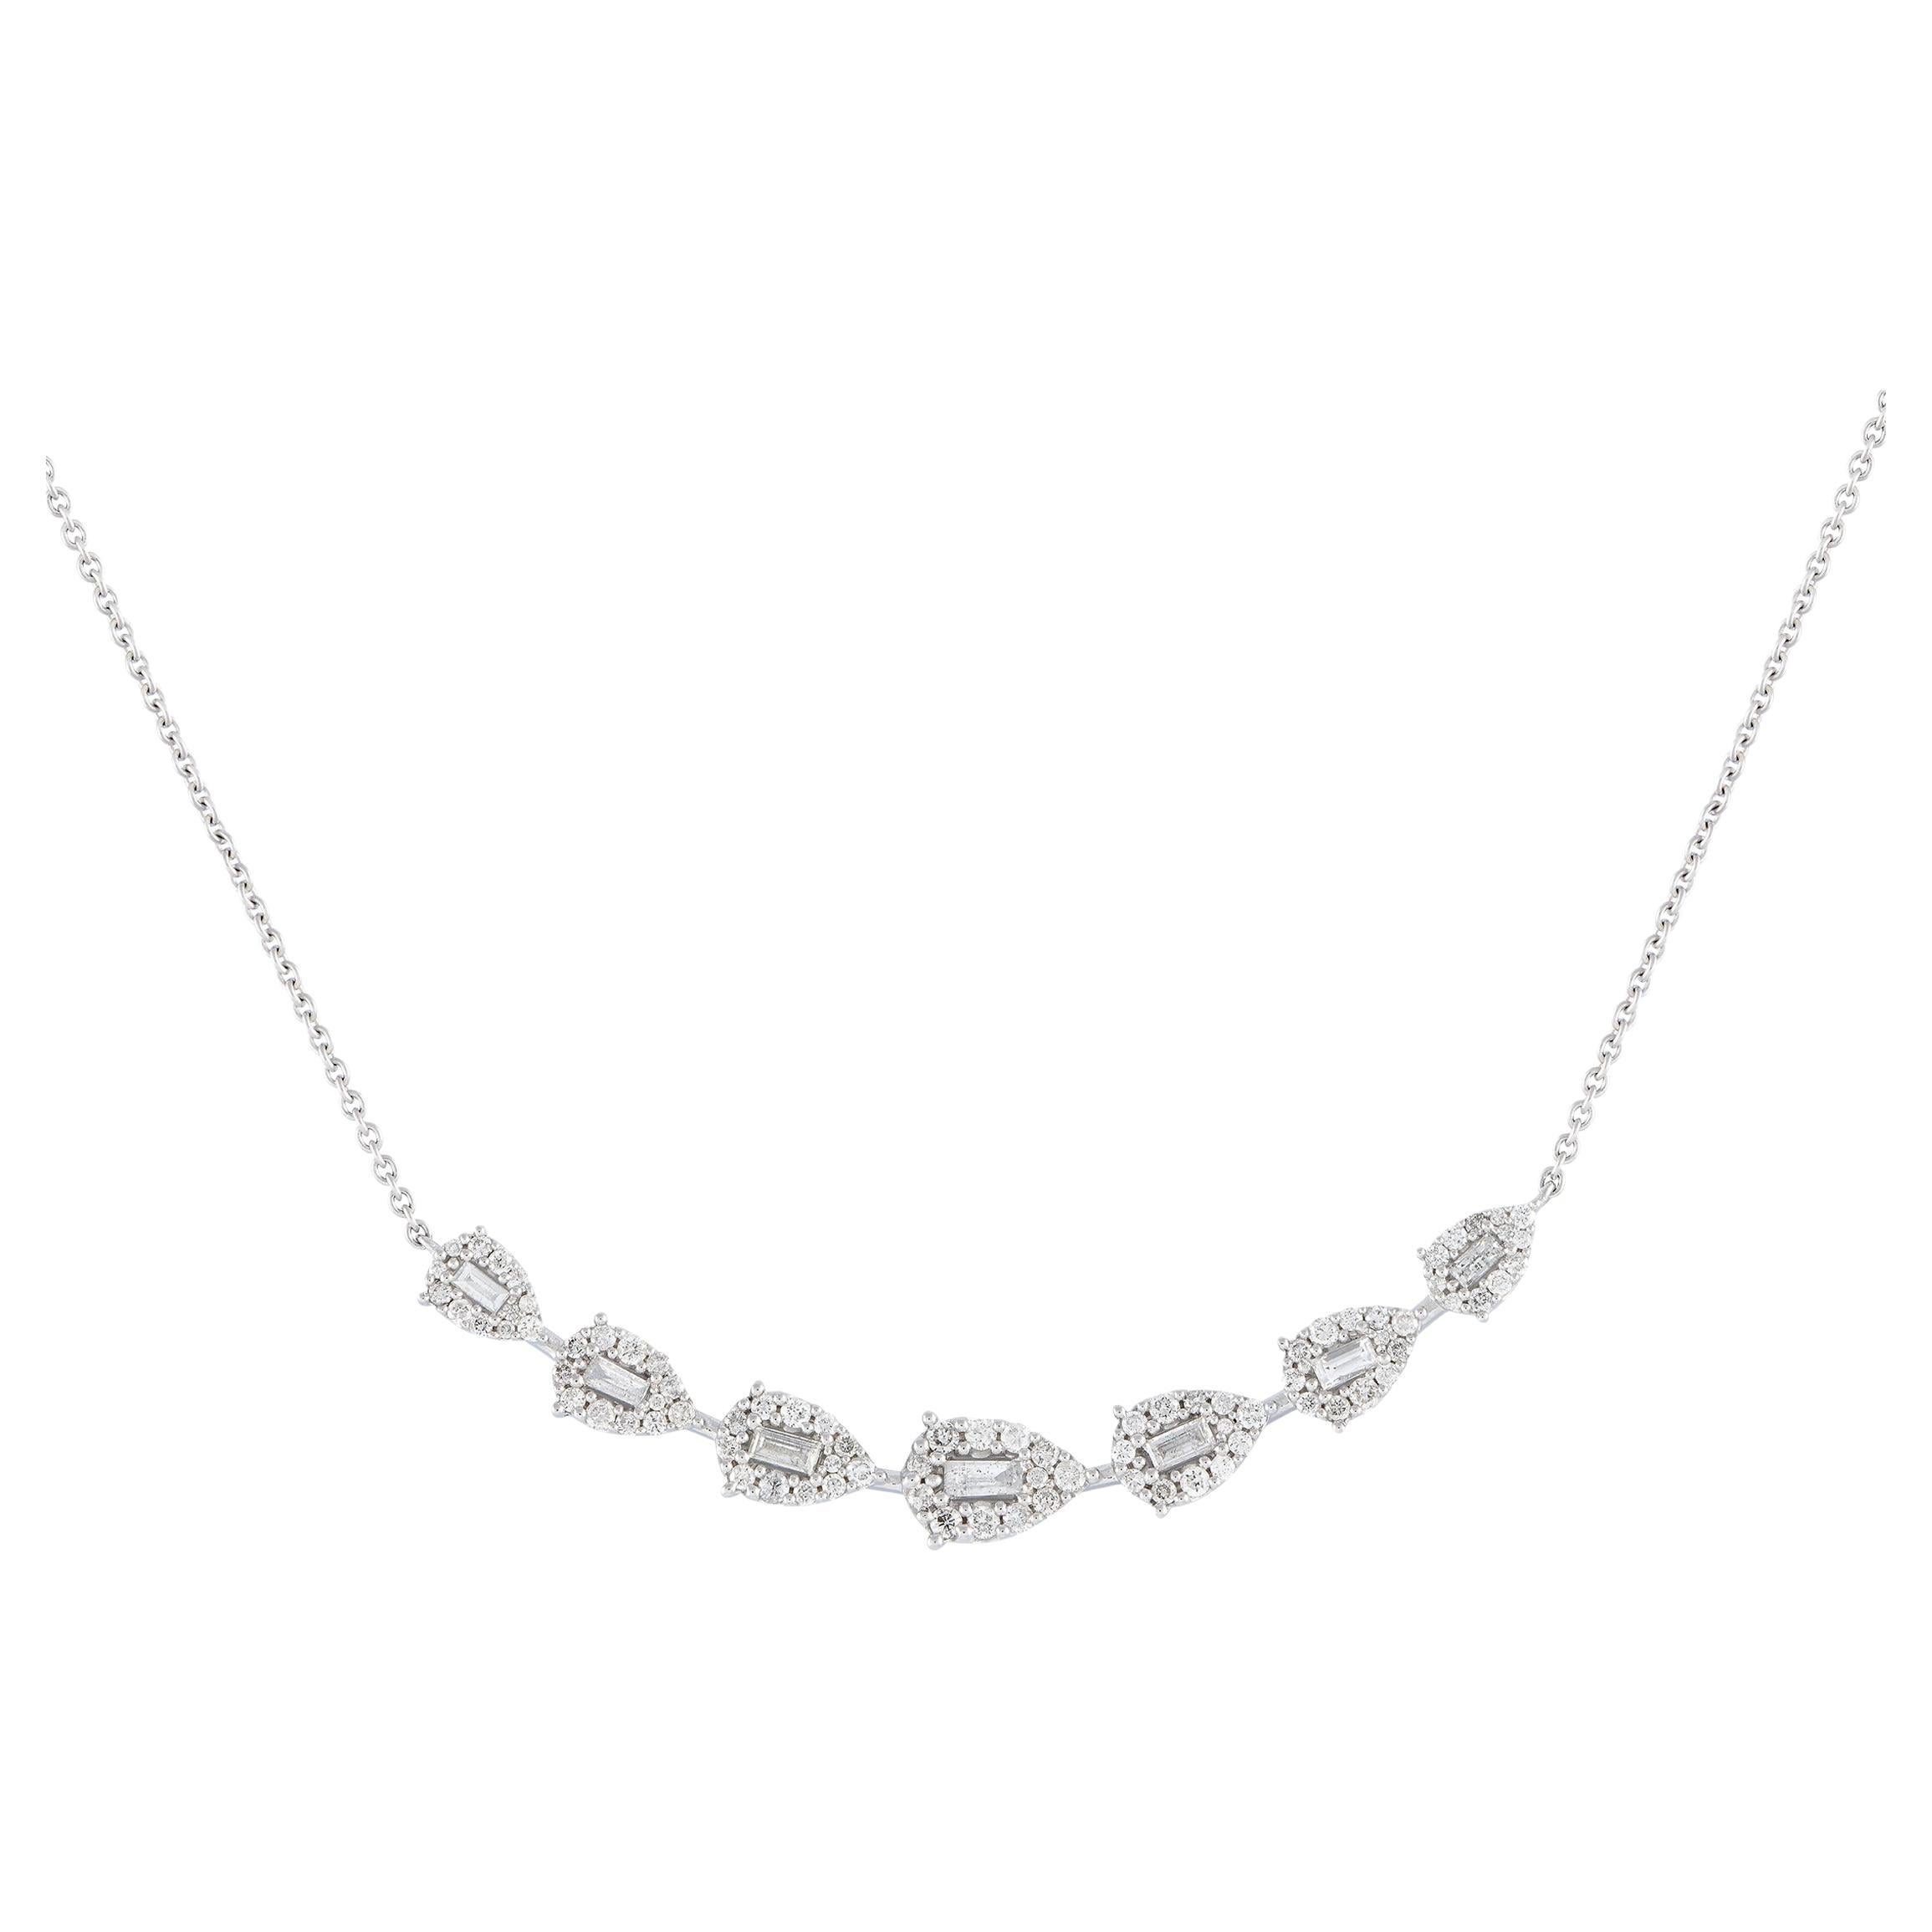 14K White Gold 1.0ct Diamond Necklace For Sale